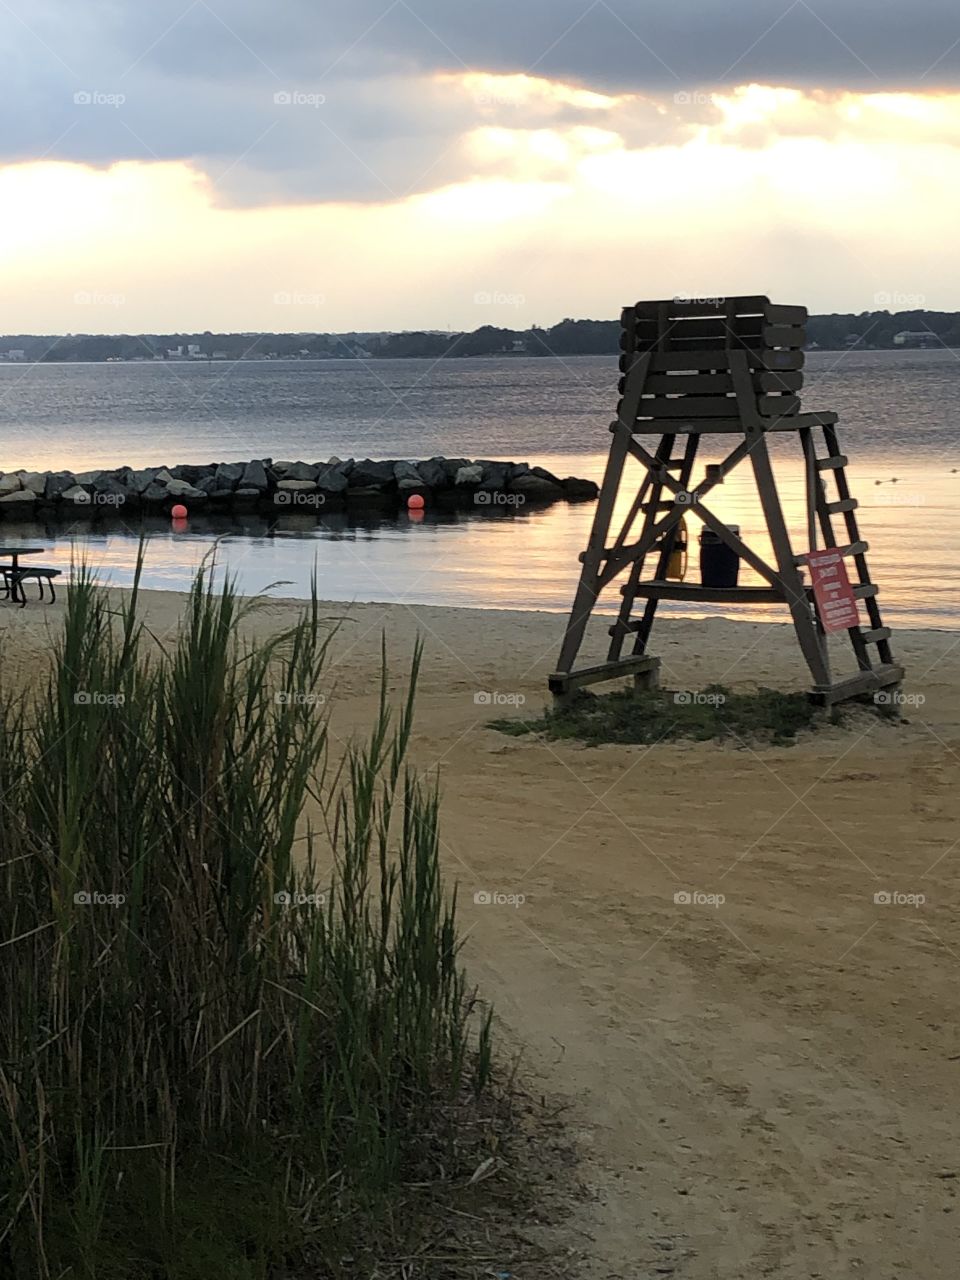 Sunset on Patuxent River